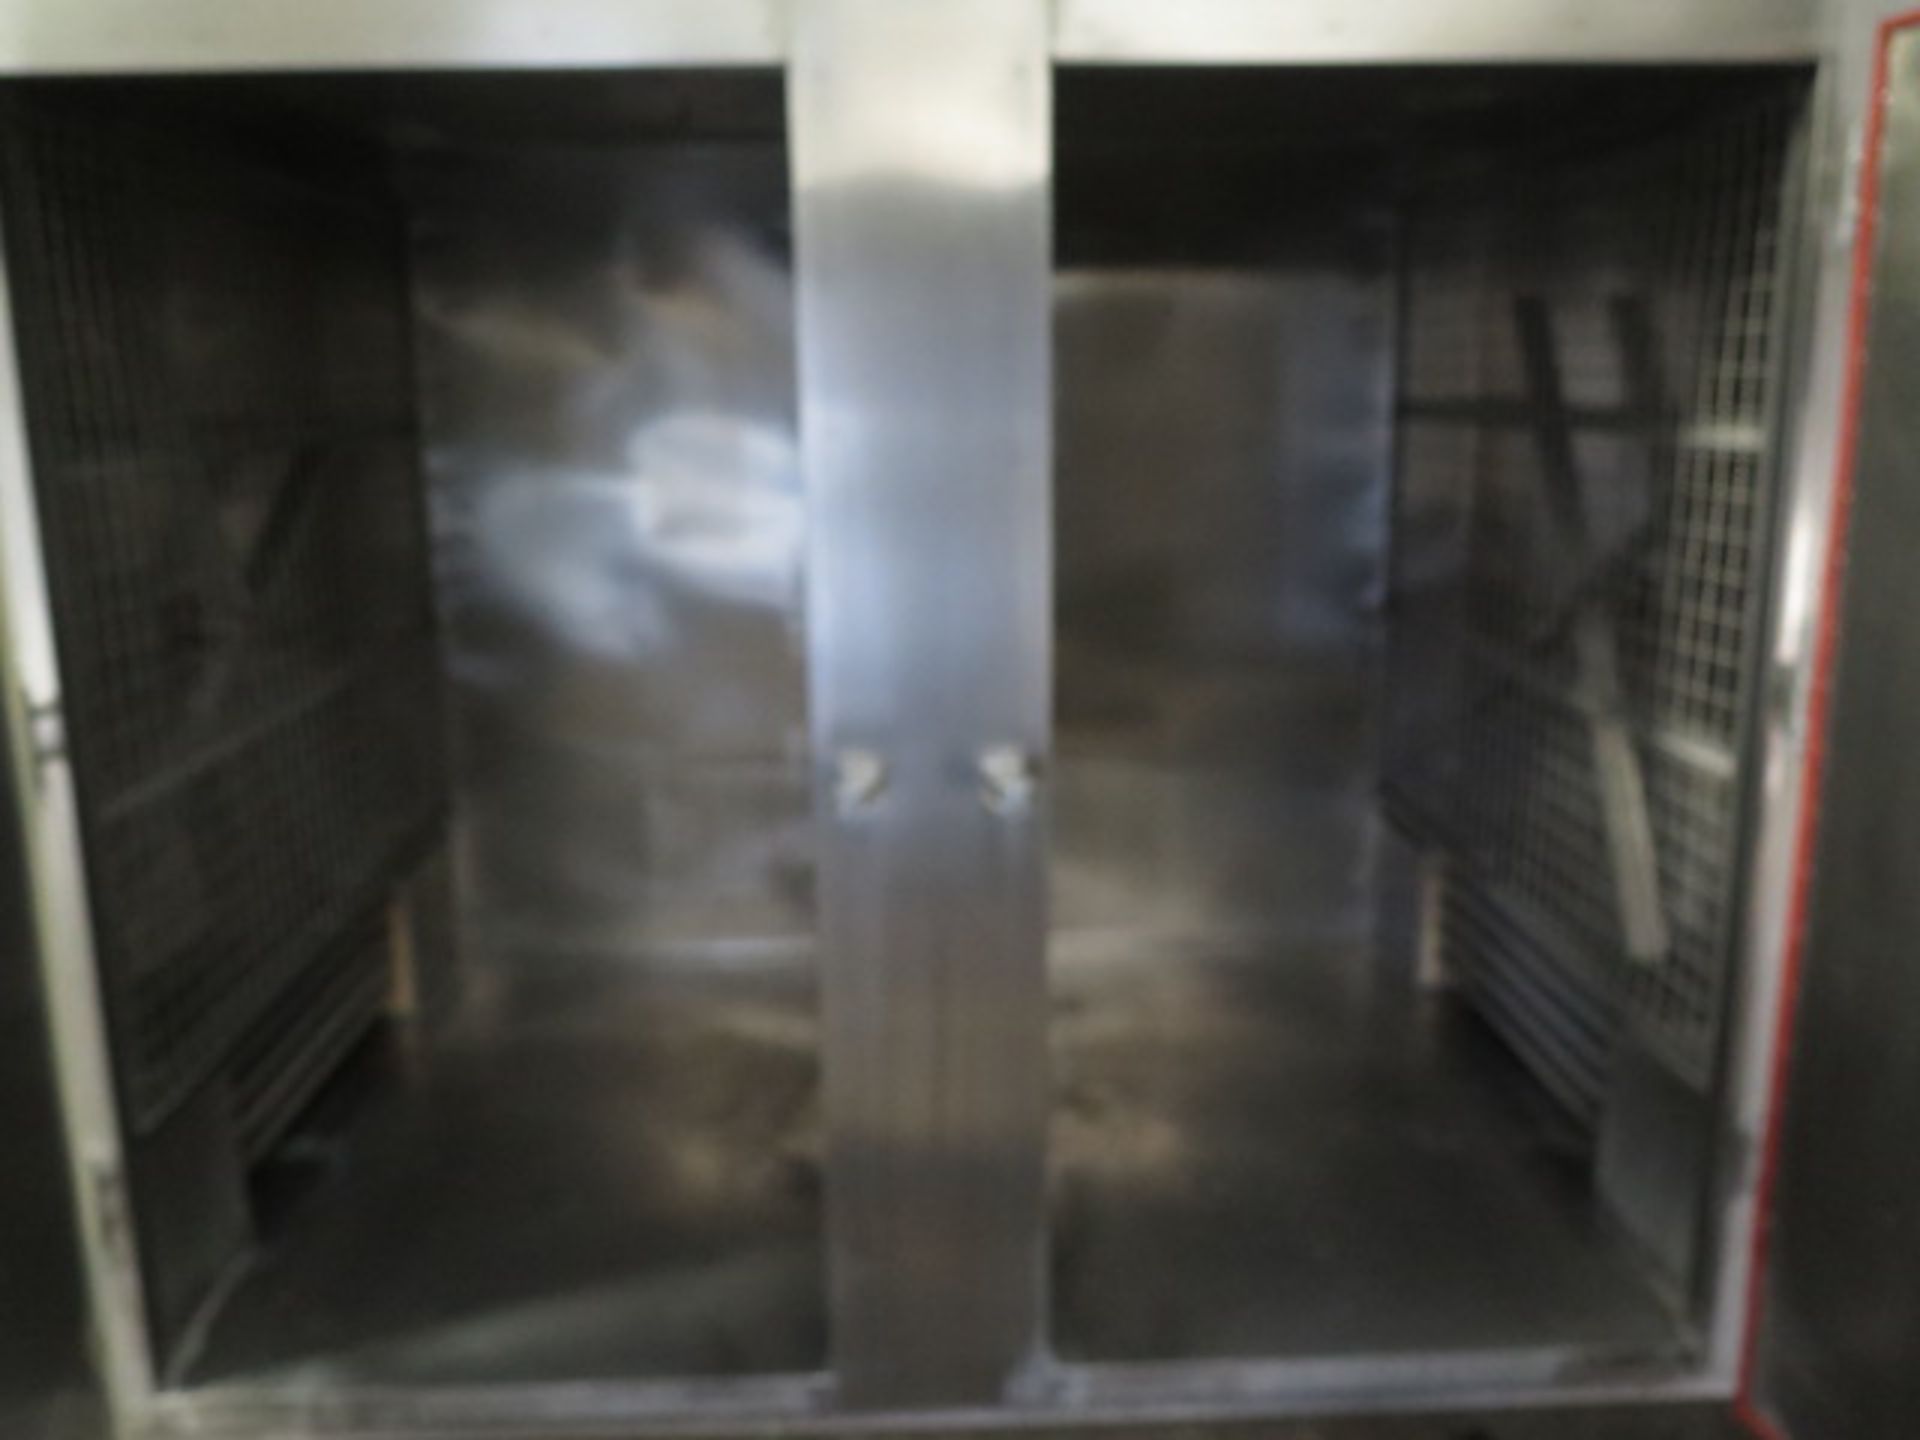 2014 Coolking Industrial mdl. Q-140 Type SY-80 2-Door Stainless Steel Industrial Oven w/ Digital - Image 4 of 10